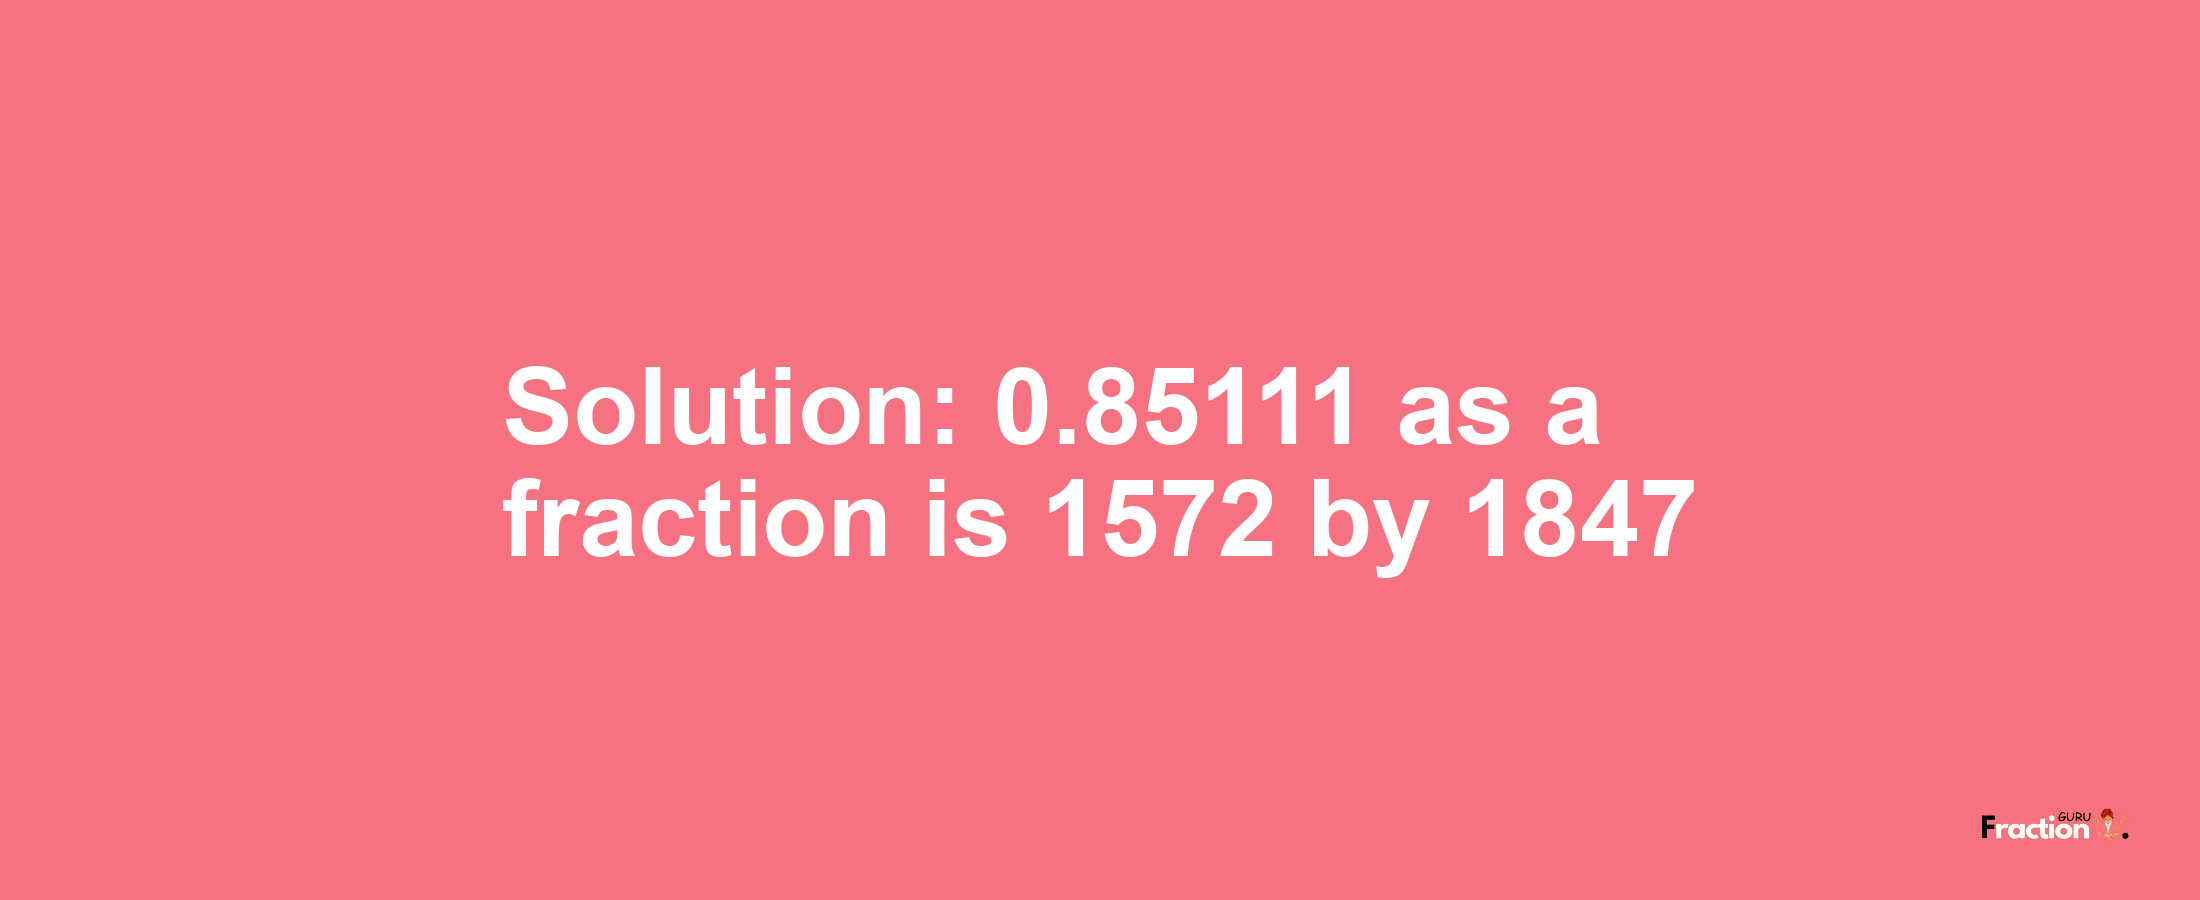 Solution:0.85111 as a fraction is 1572/1847